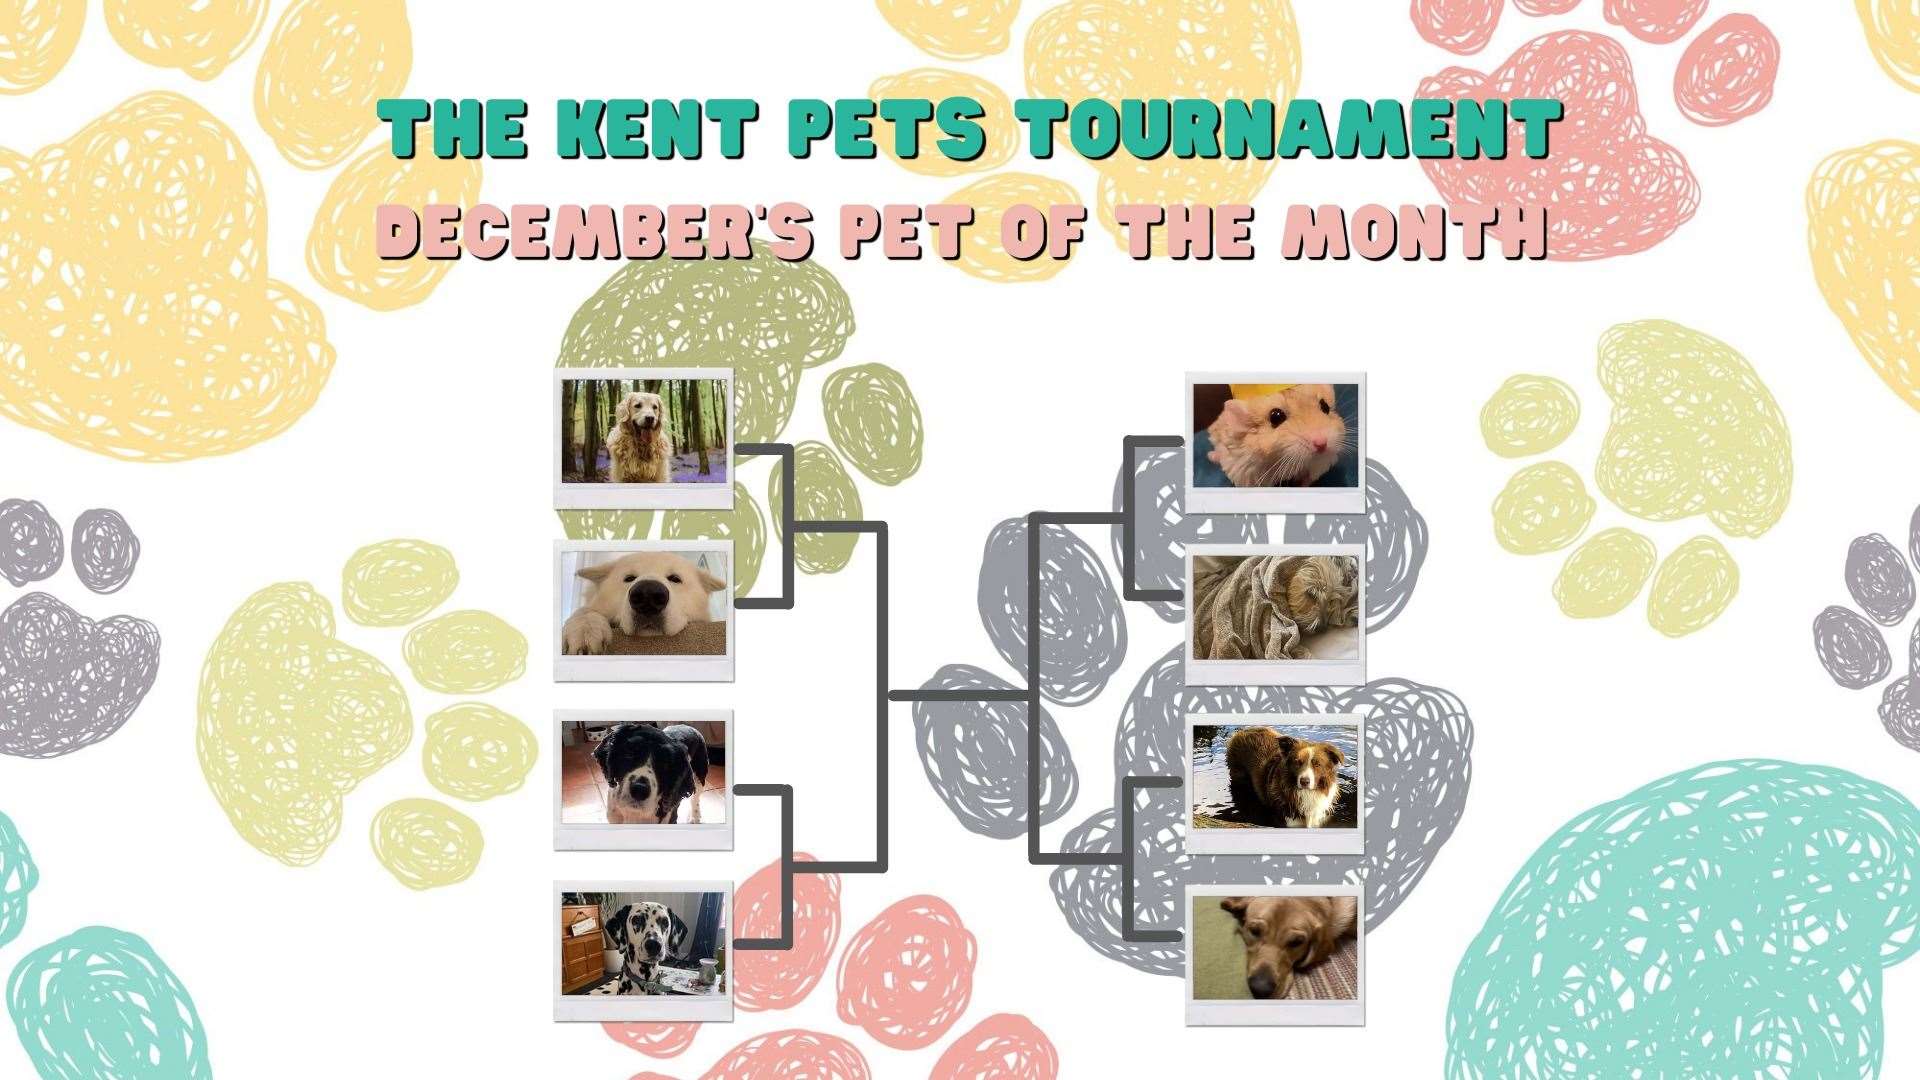 Who do you think should go into the next round of Kent Pets Tournament?